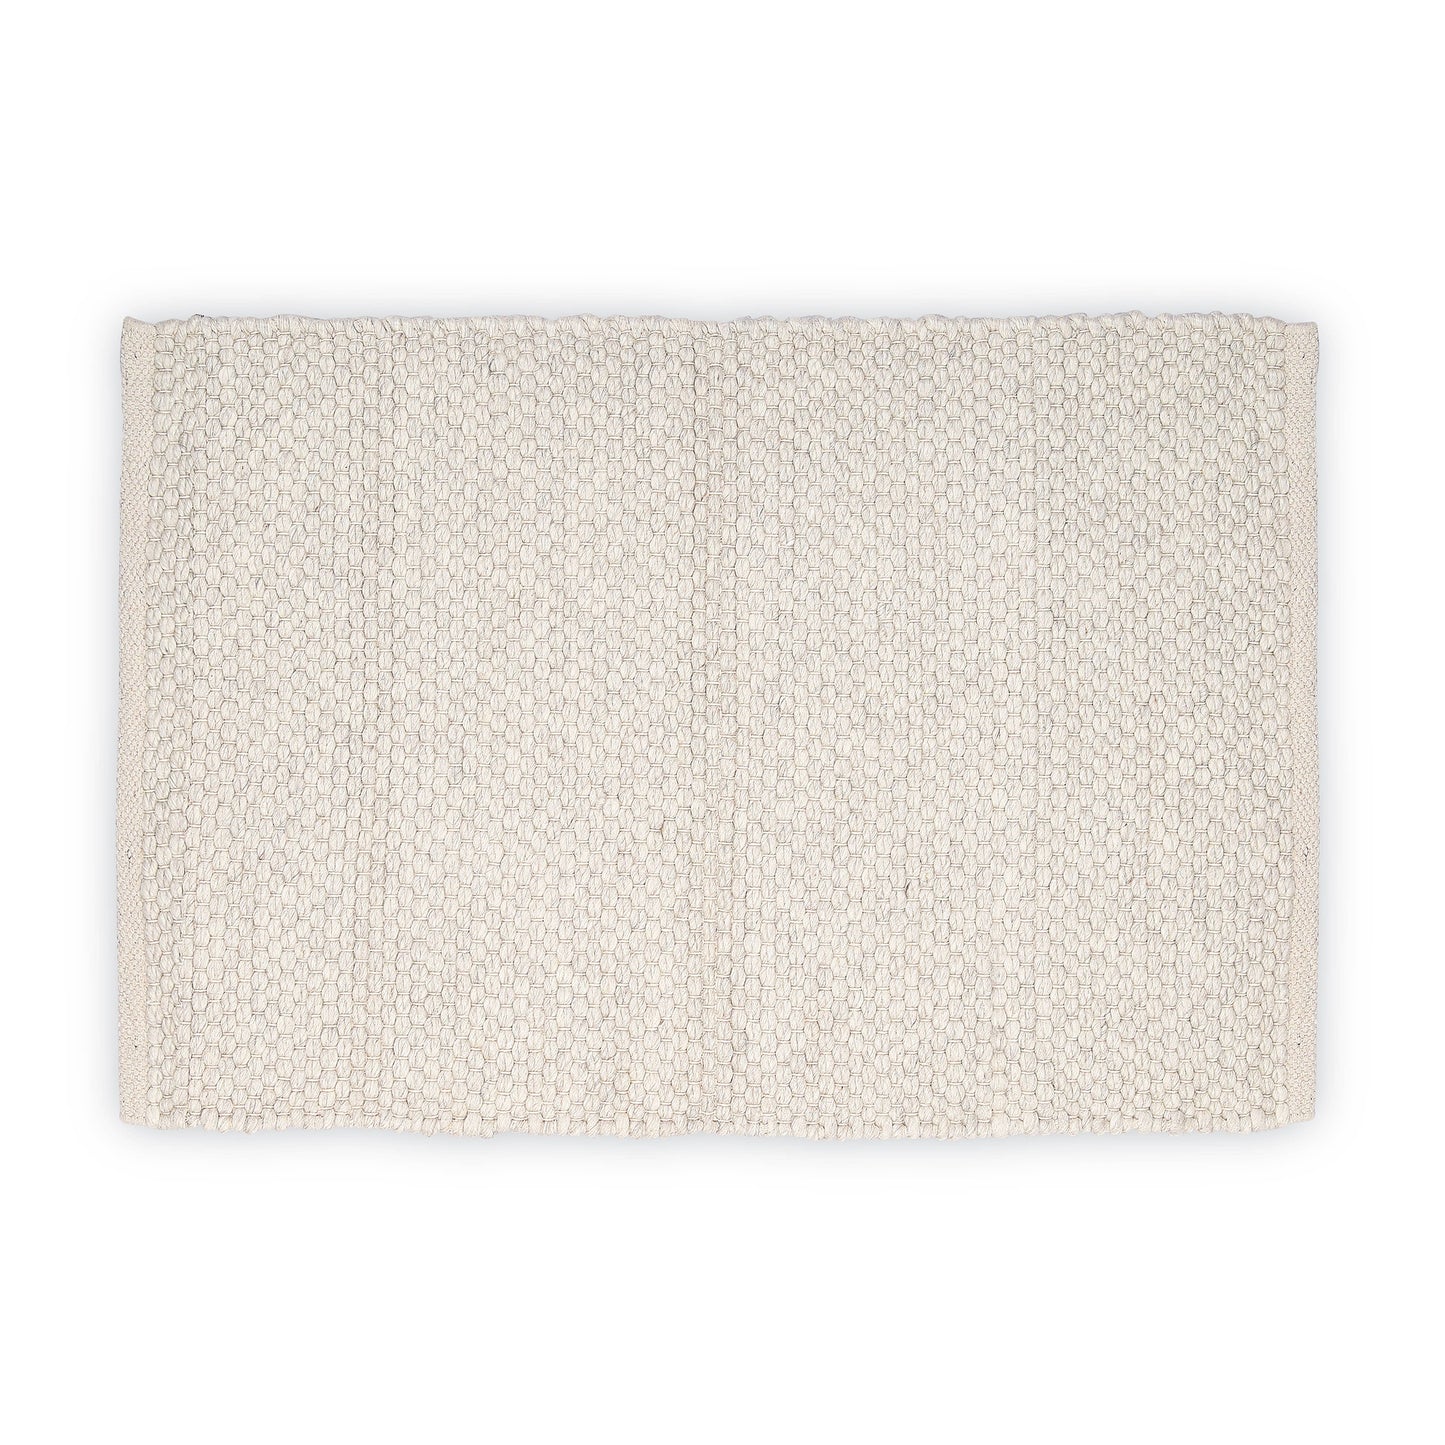 2" x 3" off white area rug